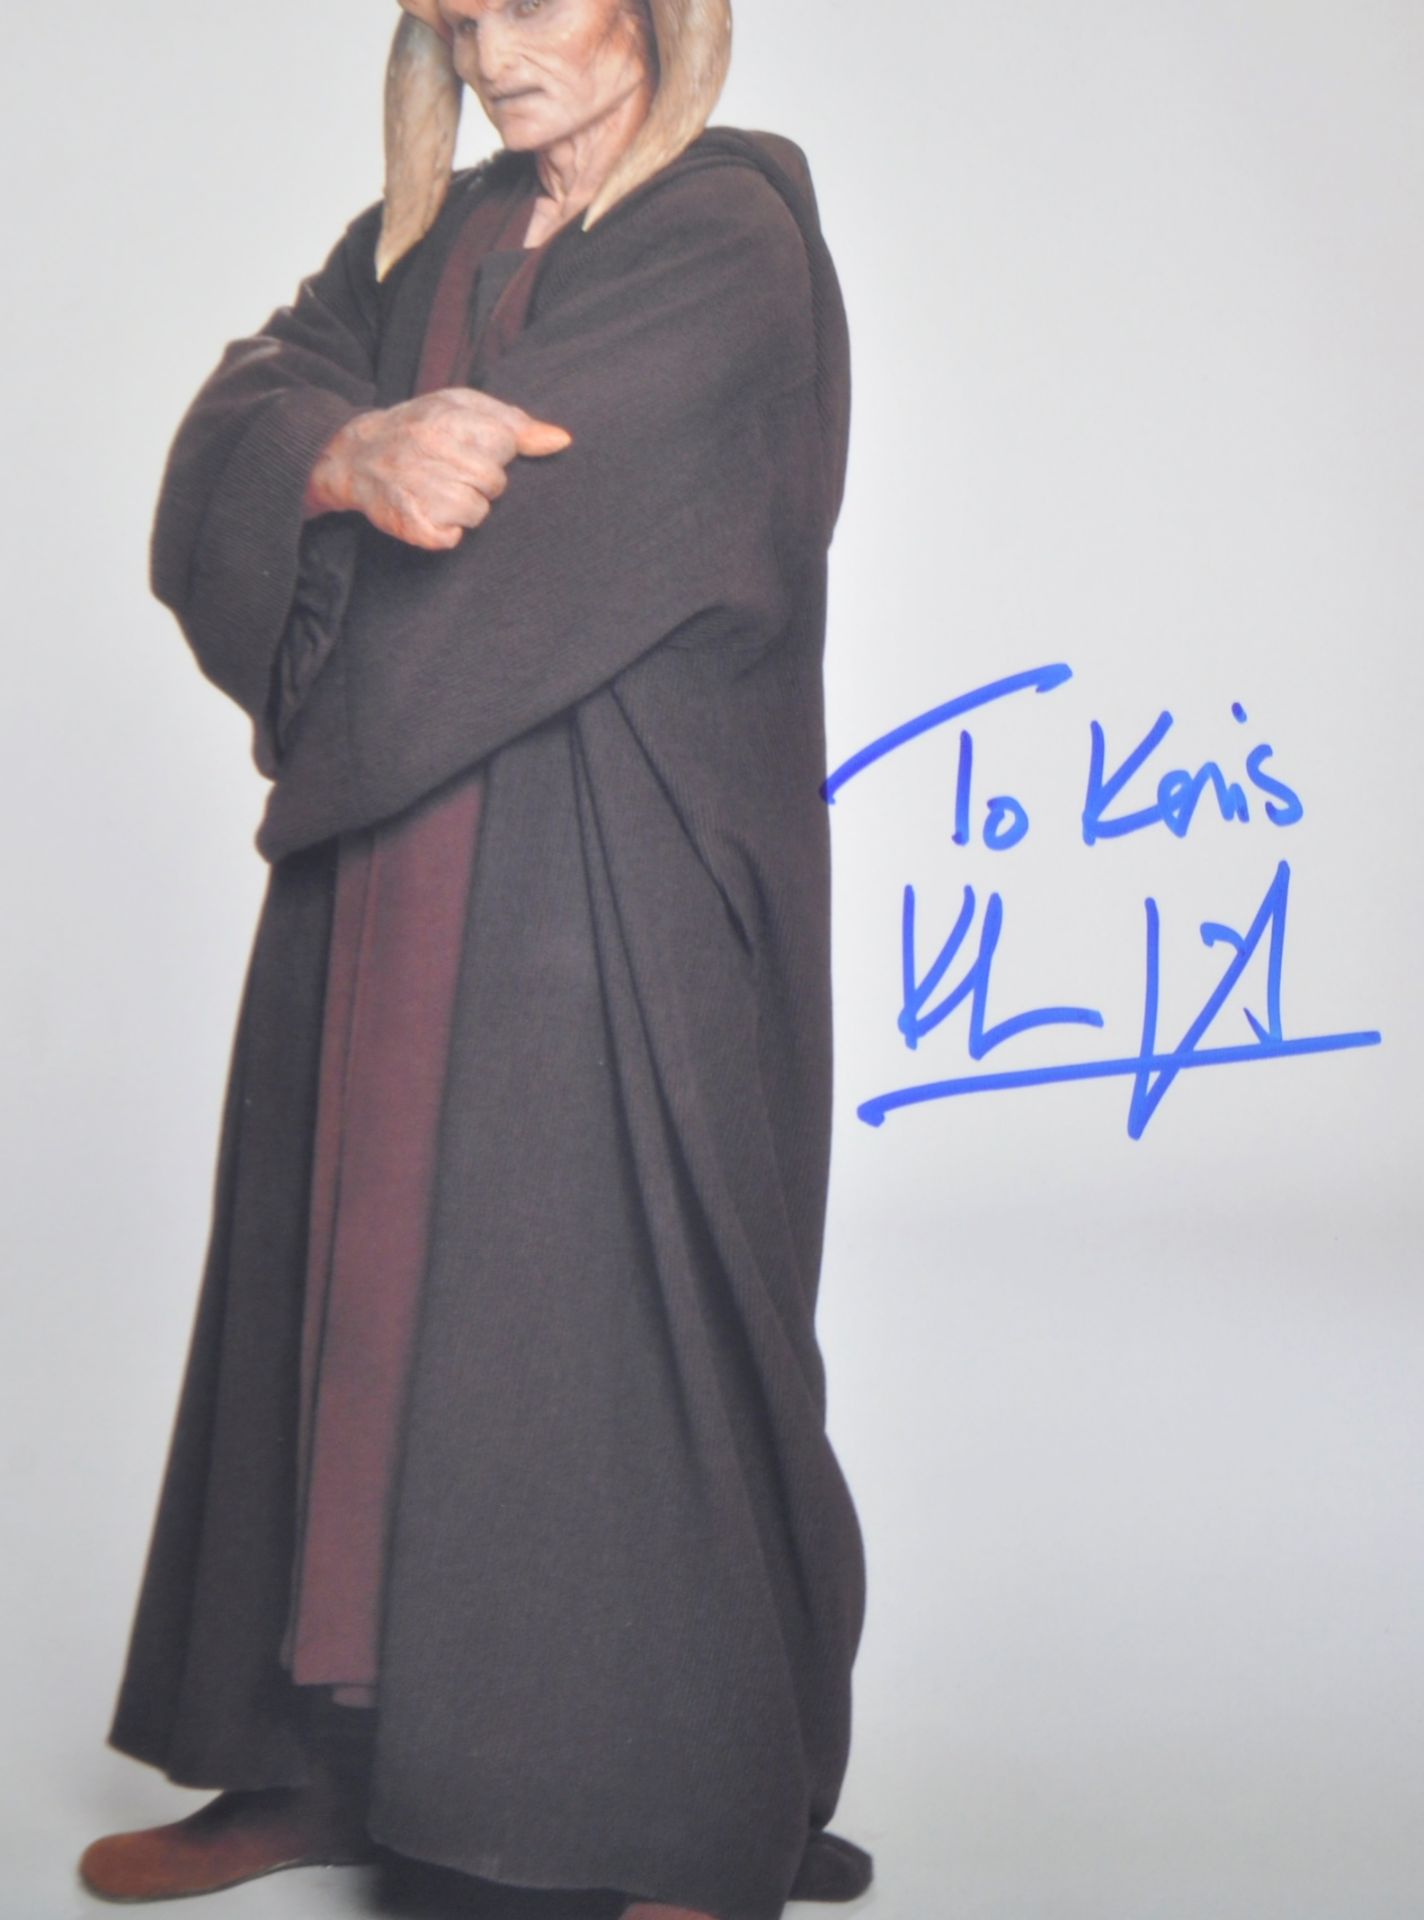 STAR WARS - THE PHANTOM MENACE - SIGNED OFFICIAL PIX COLLECTION - Image 2 of 8